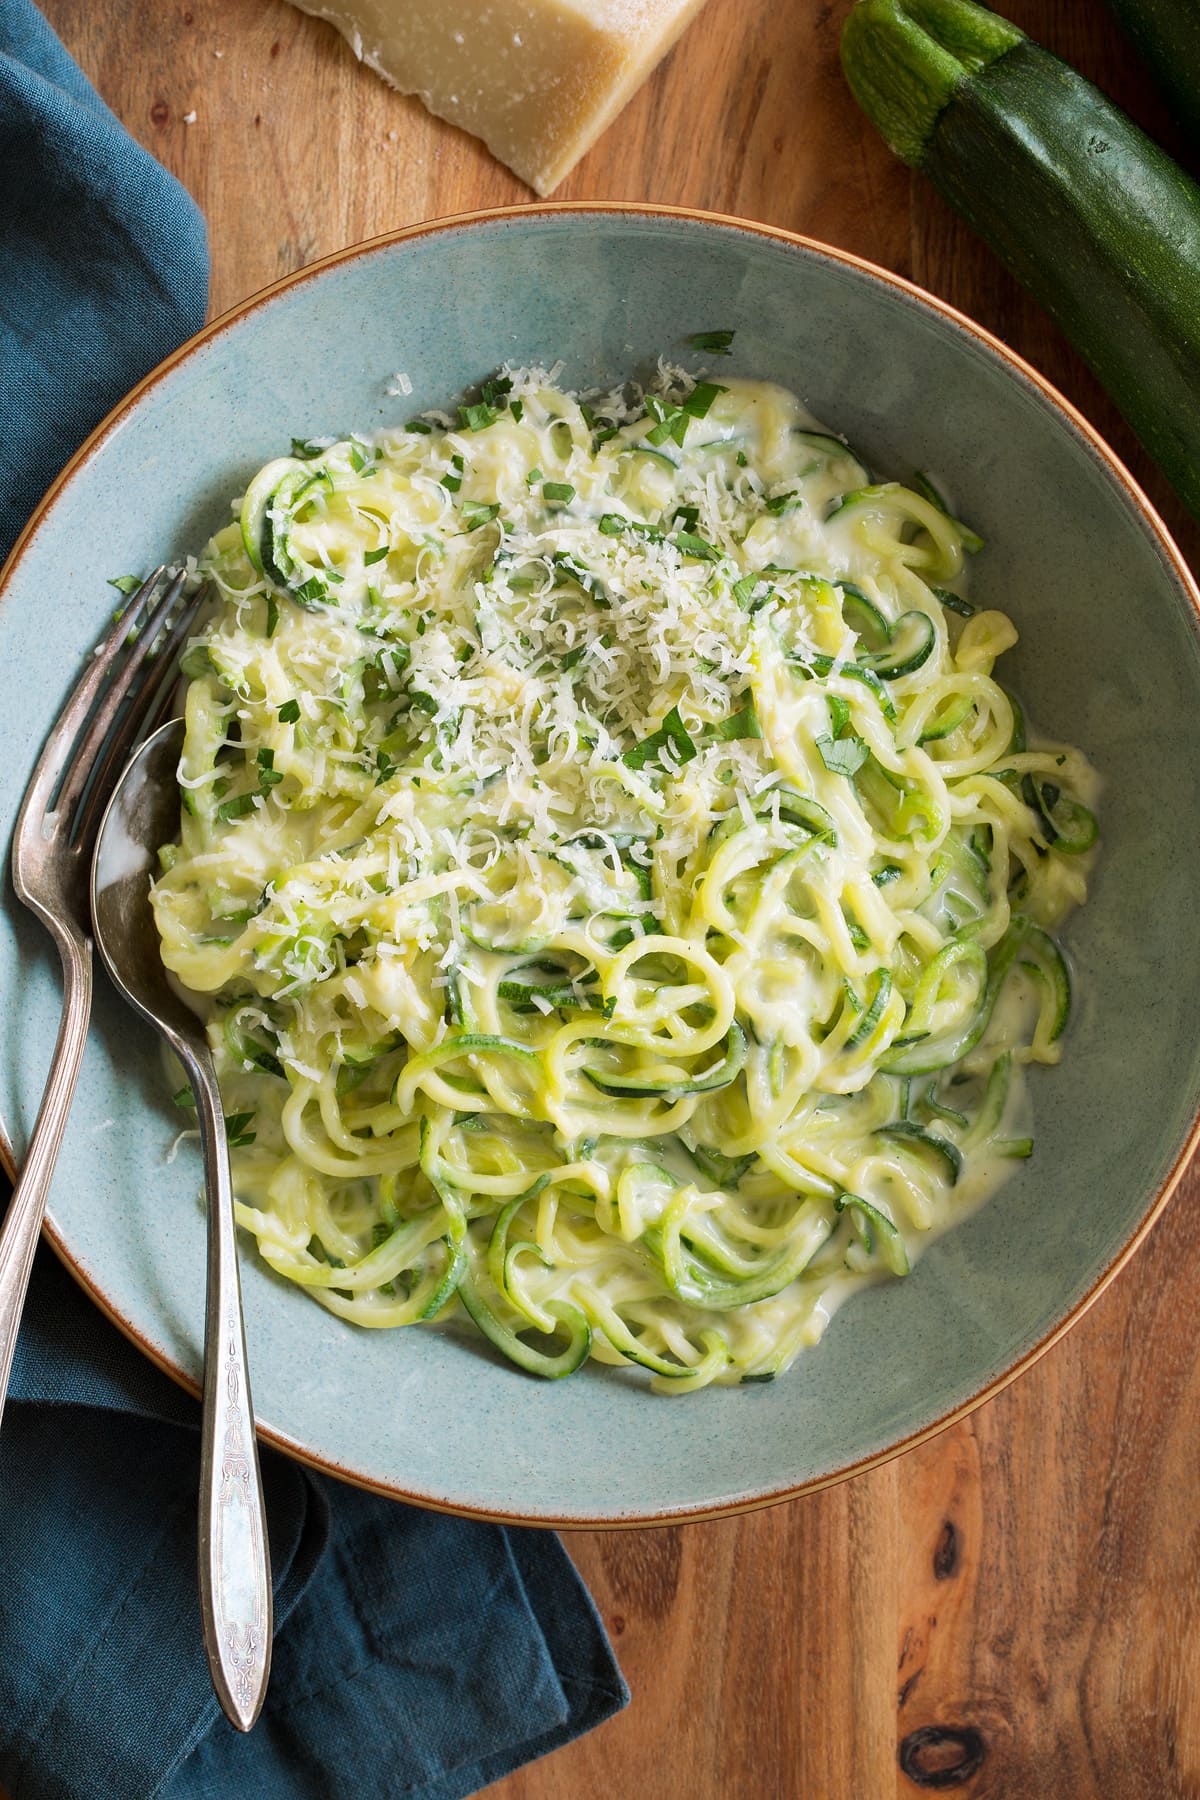 Zoodles tossed with alfredo sauce, shown served in a blue pasta bowl.